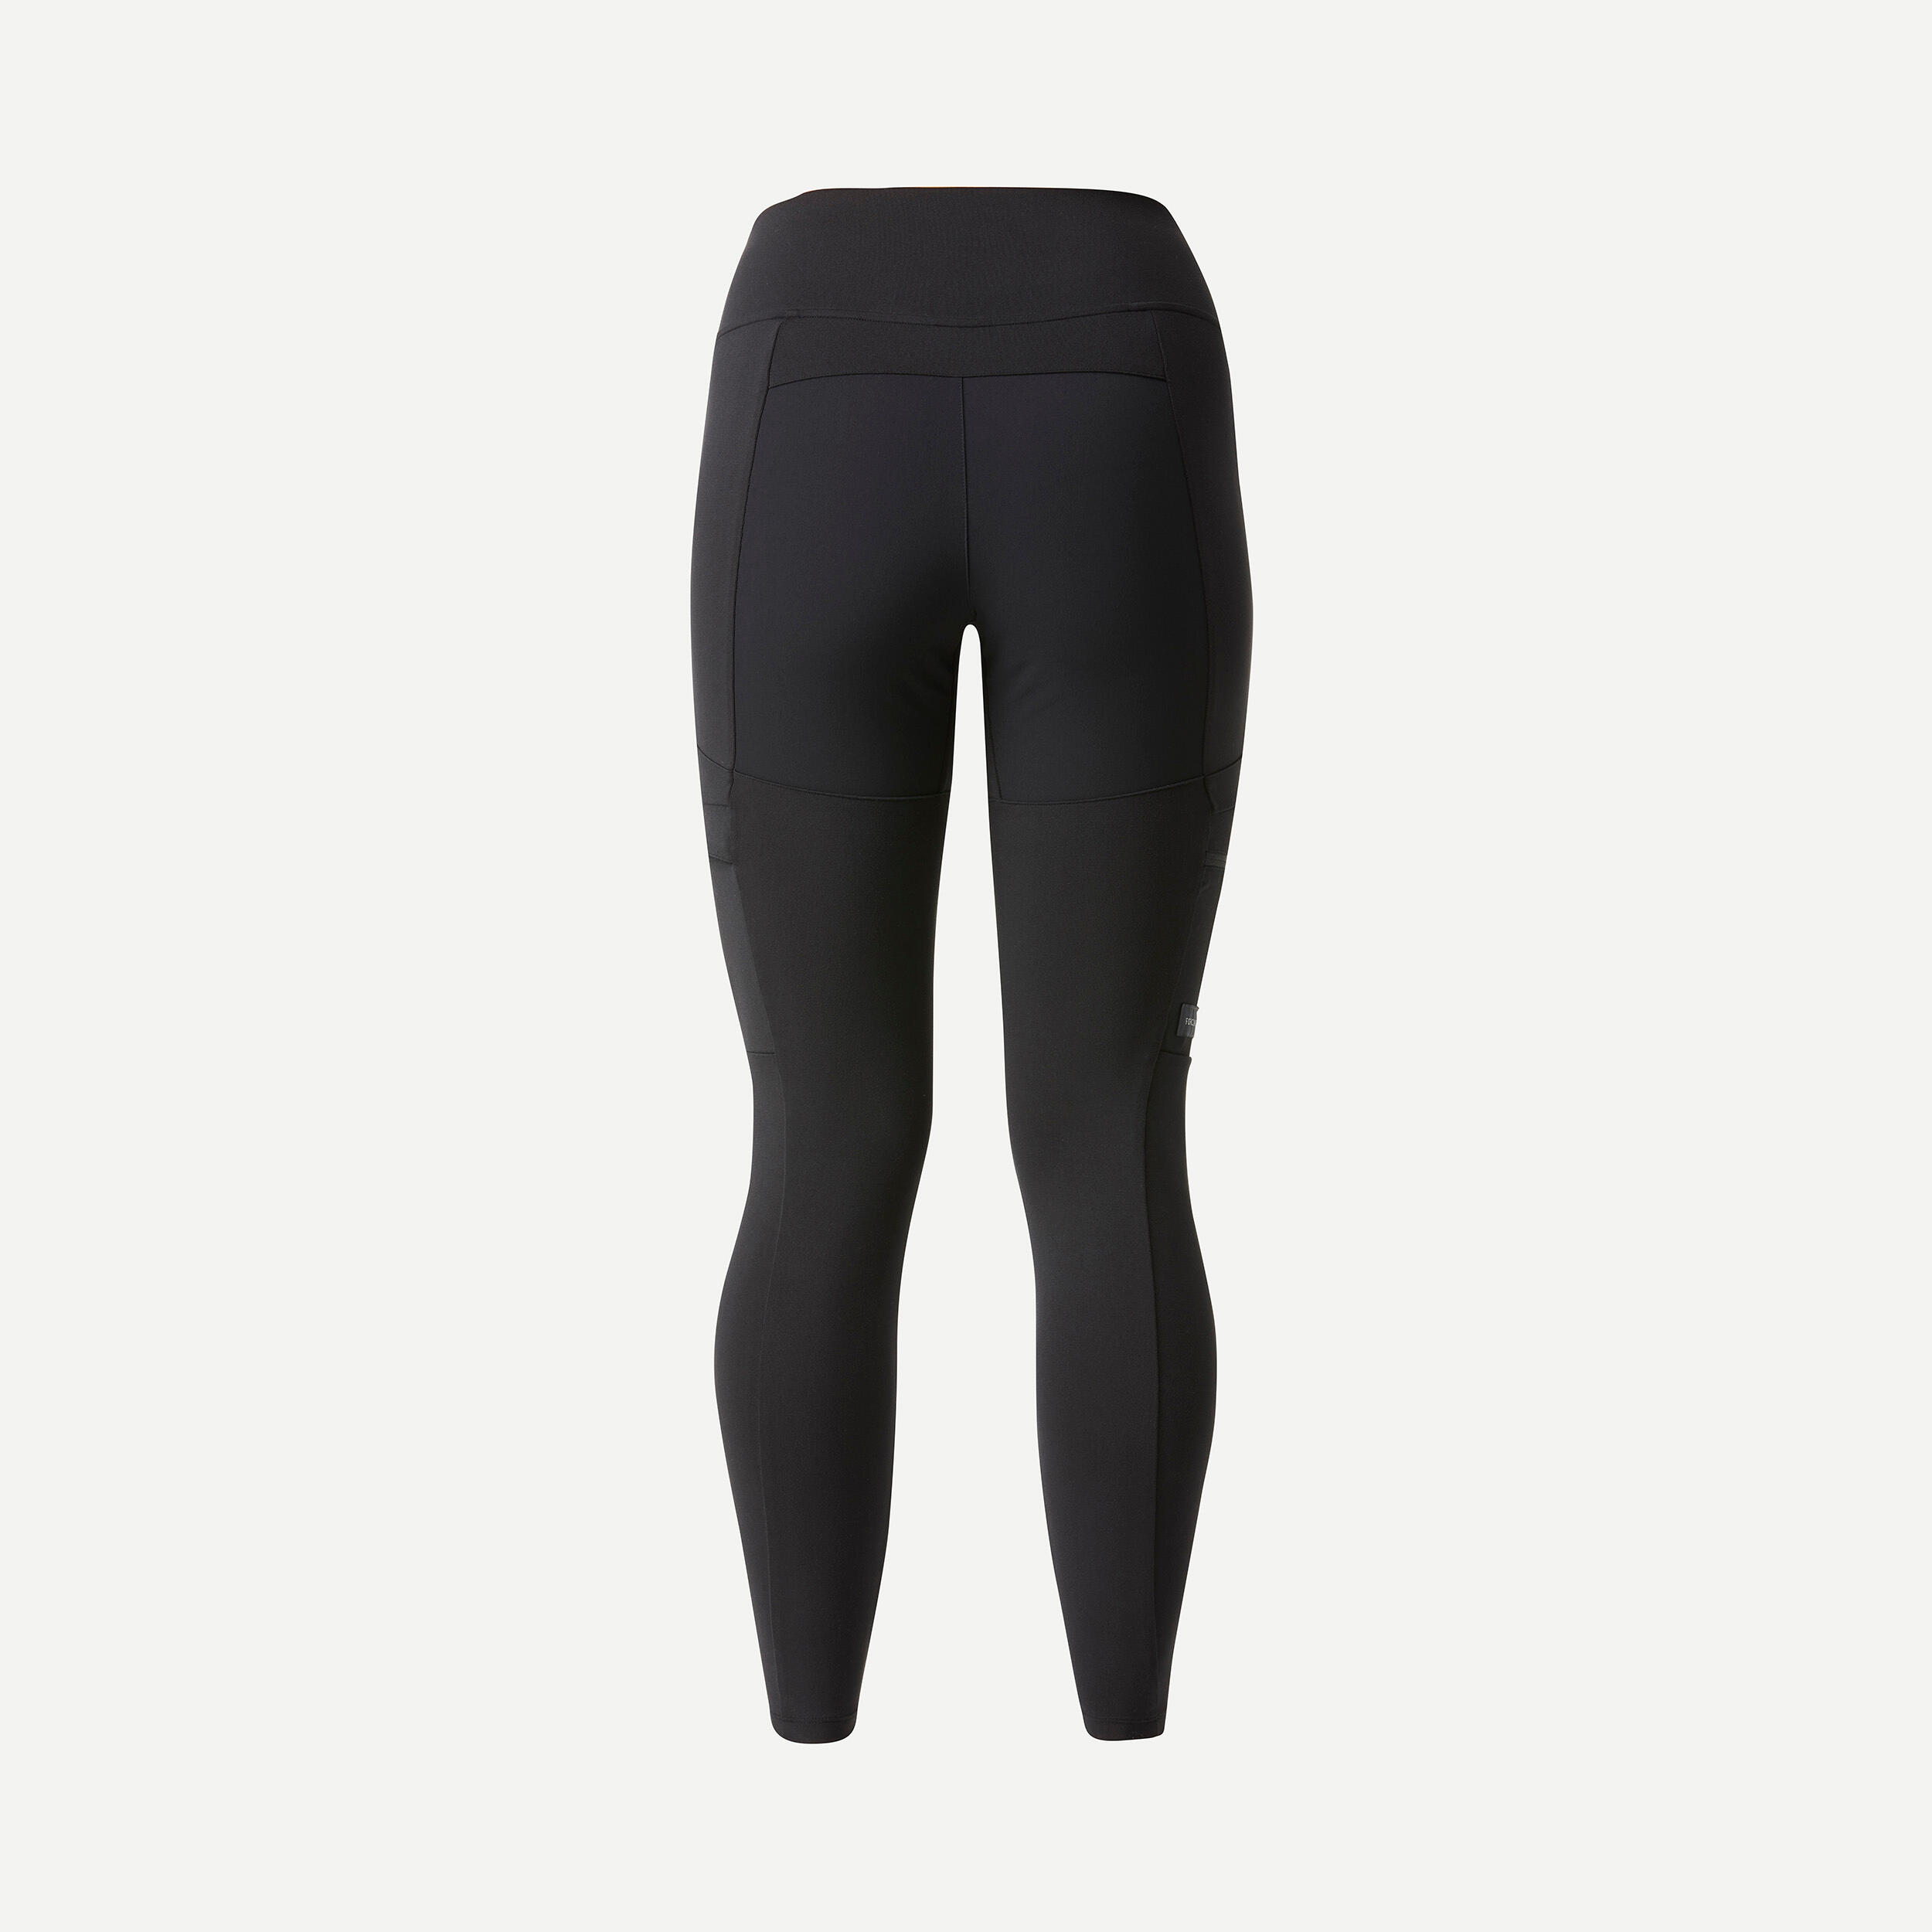 Best Deal for Harpily Travel Joggers fold Over Leggings Womens Hiking